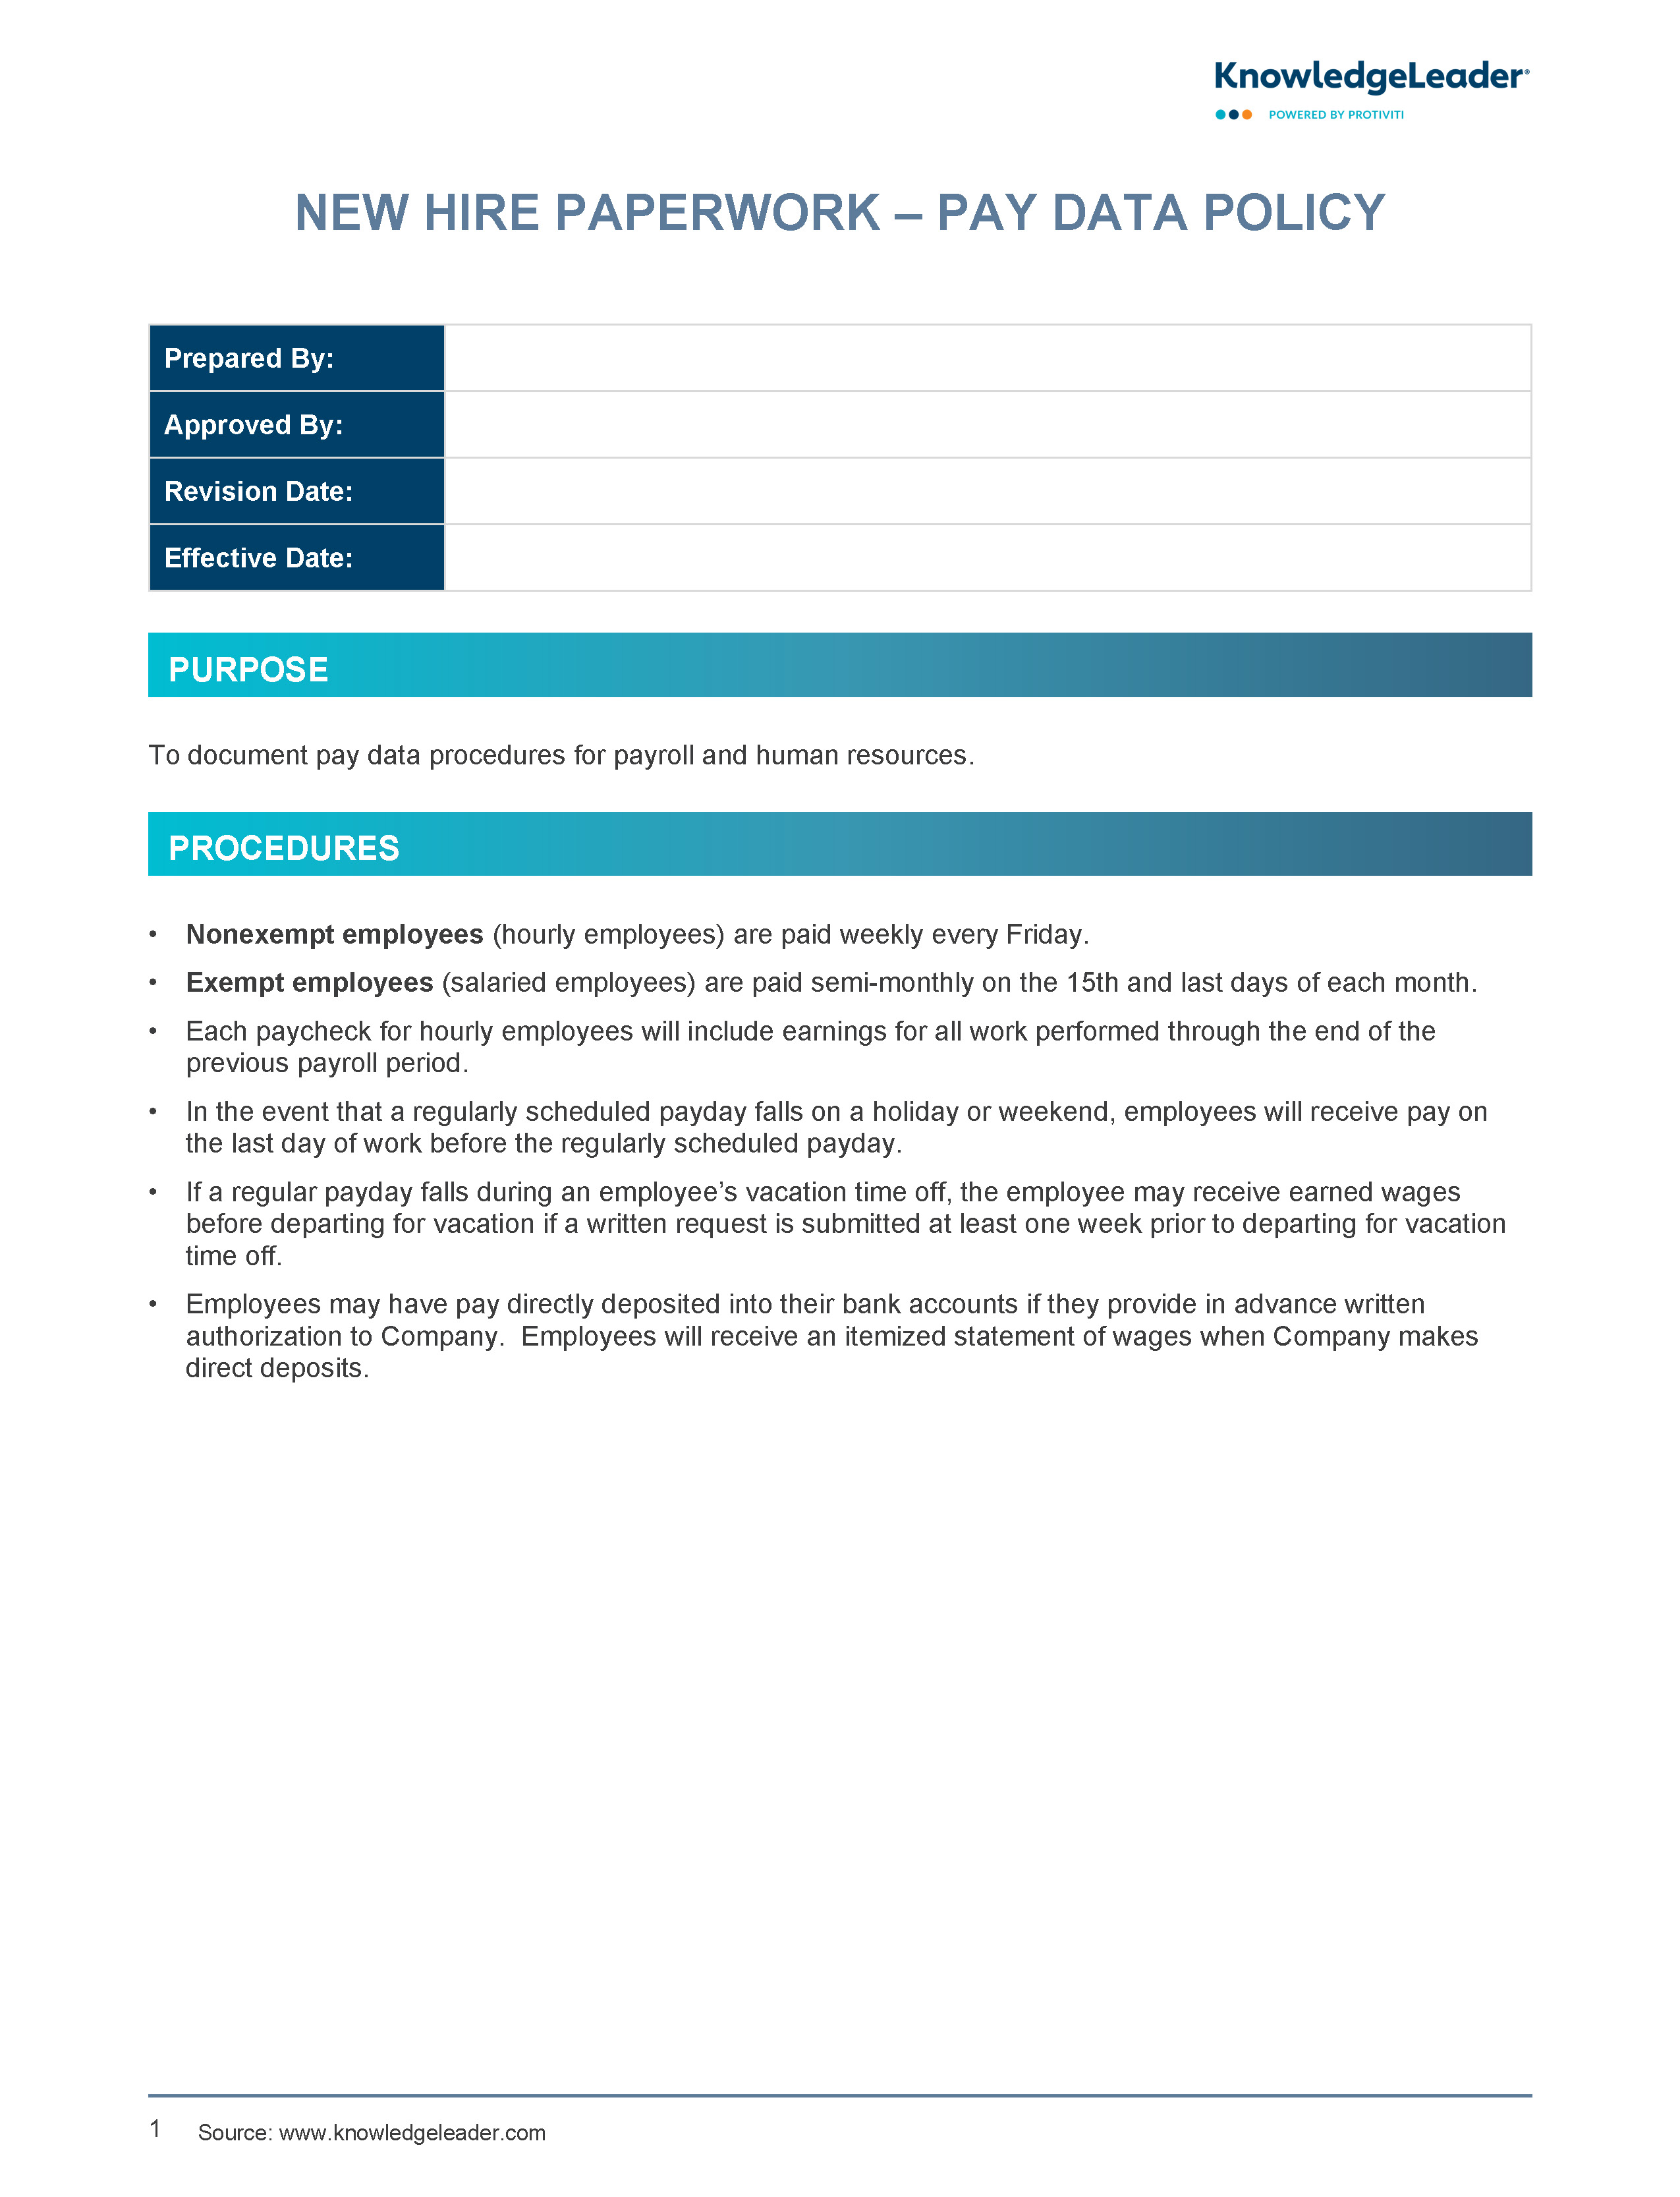 Screenshot of the first page of New Hire Paperwork - Pay Data Policy